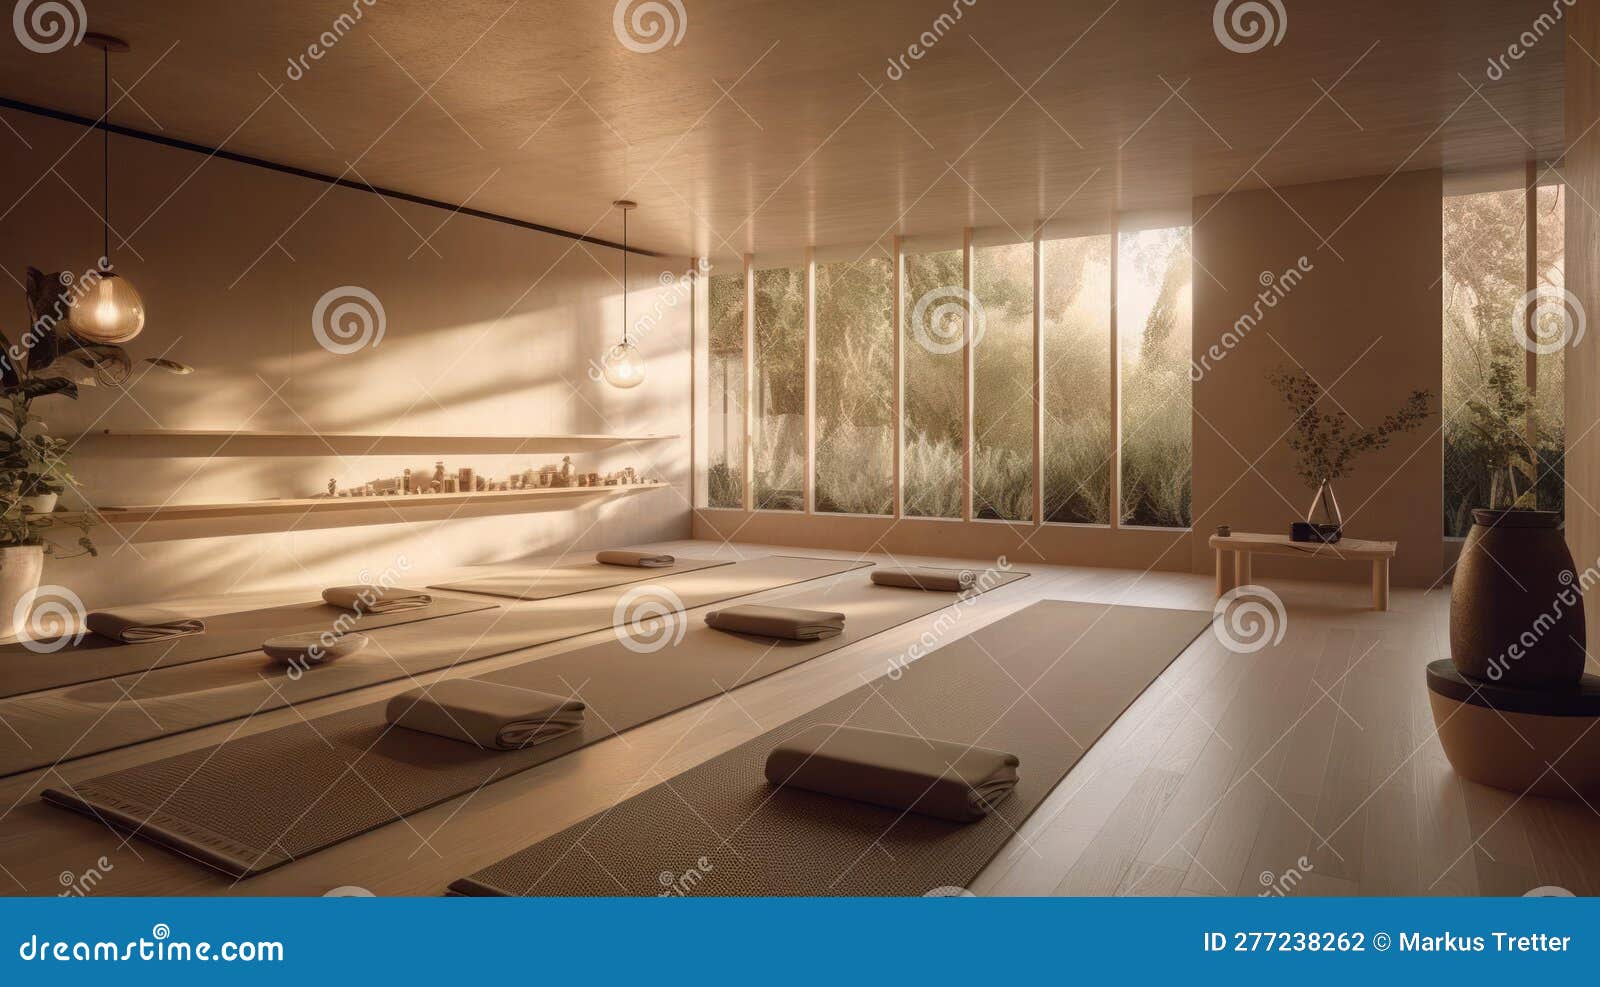 https://thumbs.dreamstime.com/z/yoga-studio-peaceful-oasis-inviting-you-to-unwind-center-yourself-amidst-soft-glow-lighting-soothing-melodies-277238262.jpg